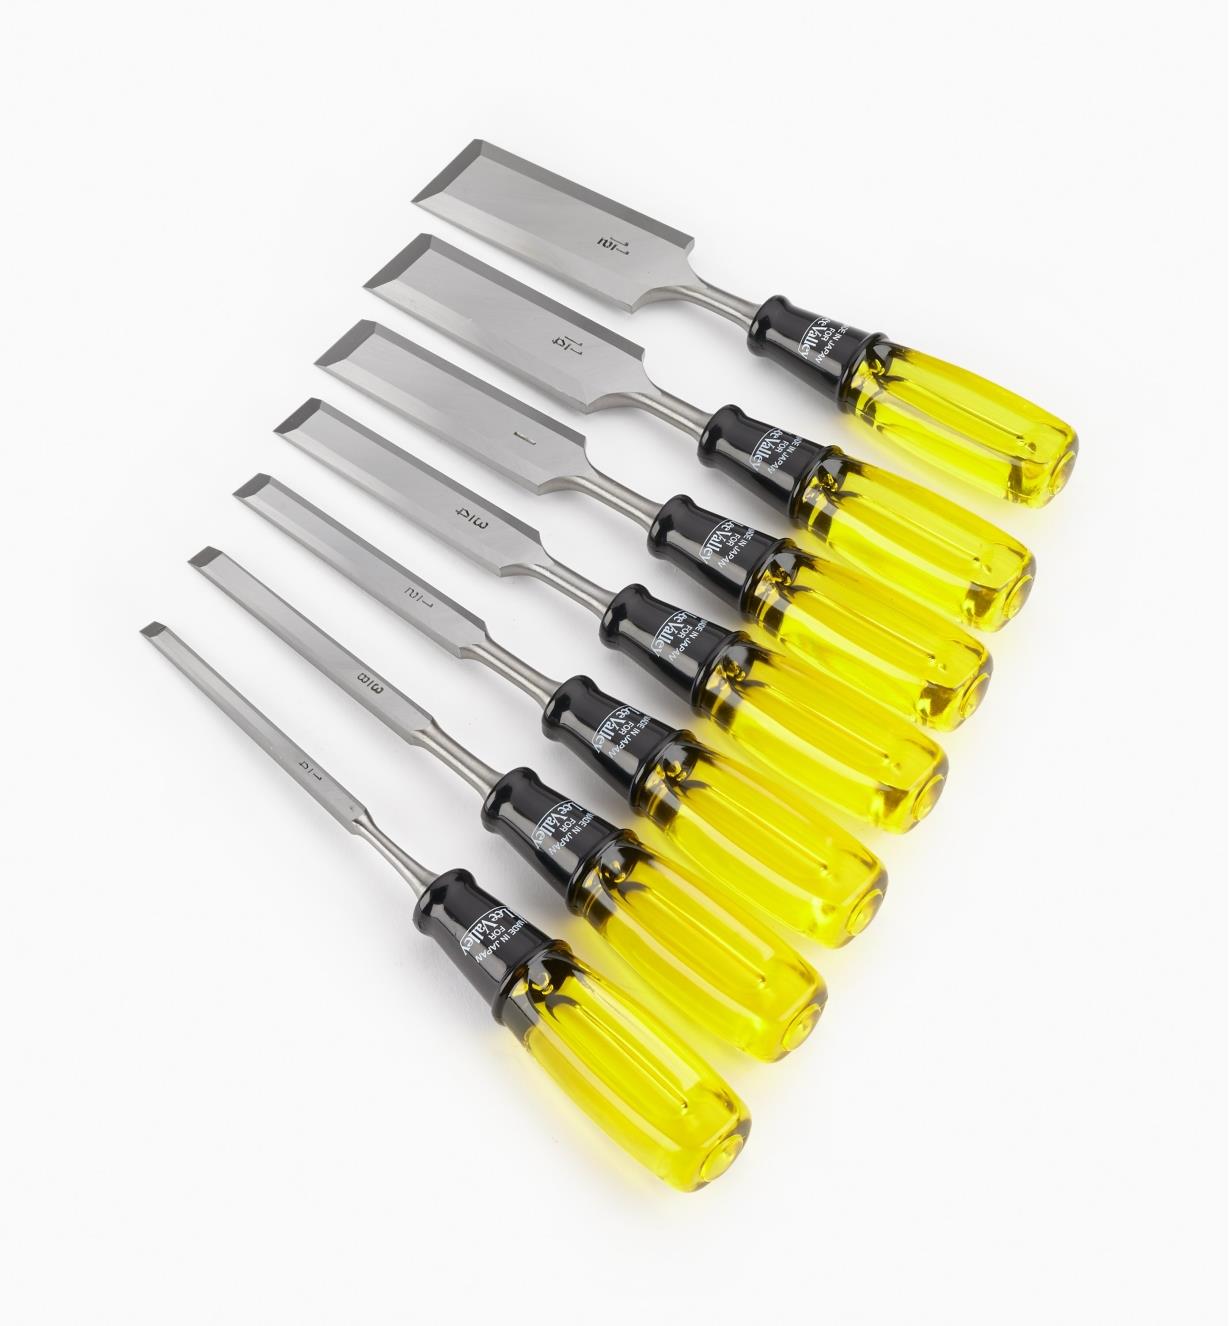 44S0121 - Set of 7 Bevel-Edge Chisels (1/4" to 1 1/2")